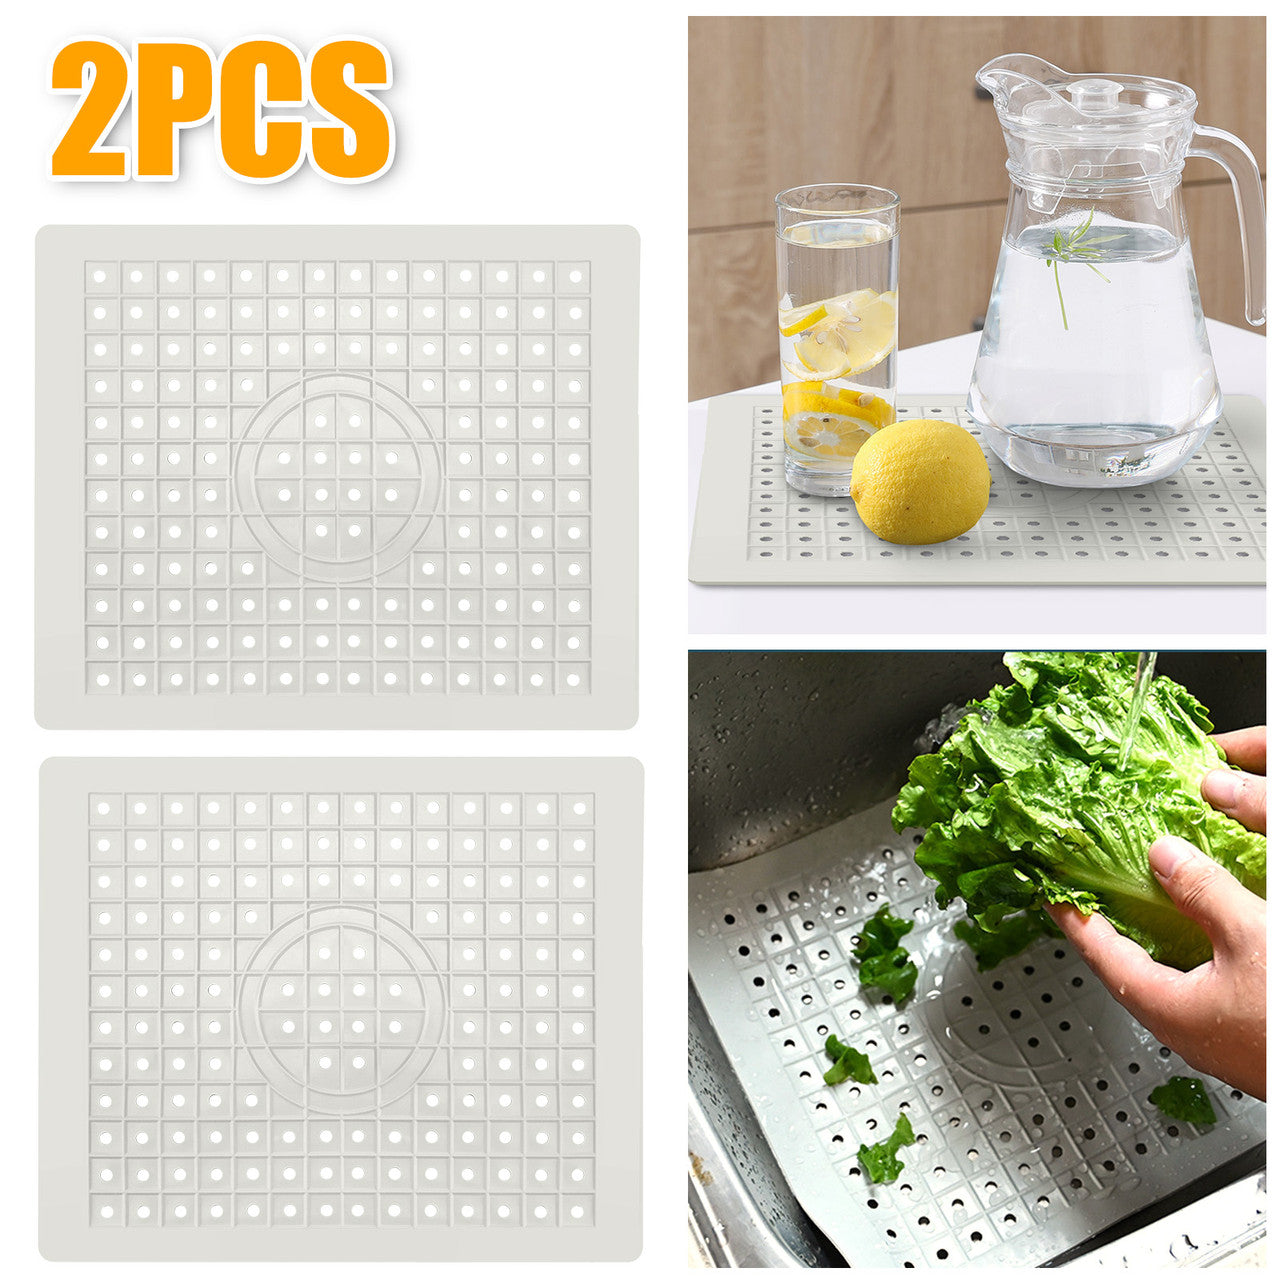 2 Pcs Kitchen Sink Mats - 12.2 x 10.24 IN Soft Rubber Sink Protector ,Quick Draining Design (Grey)